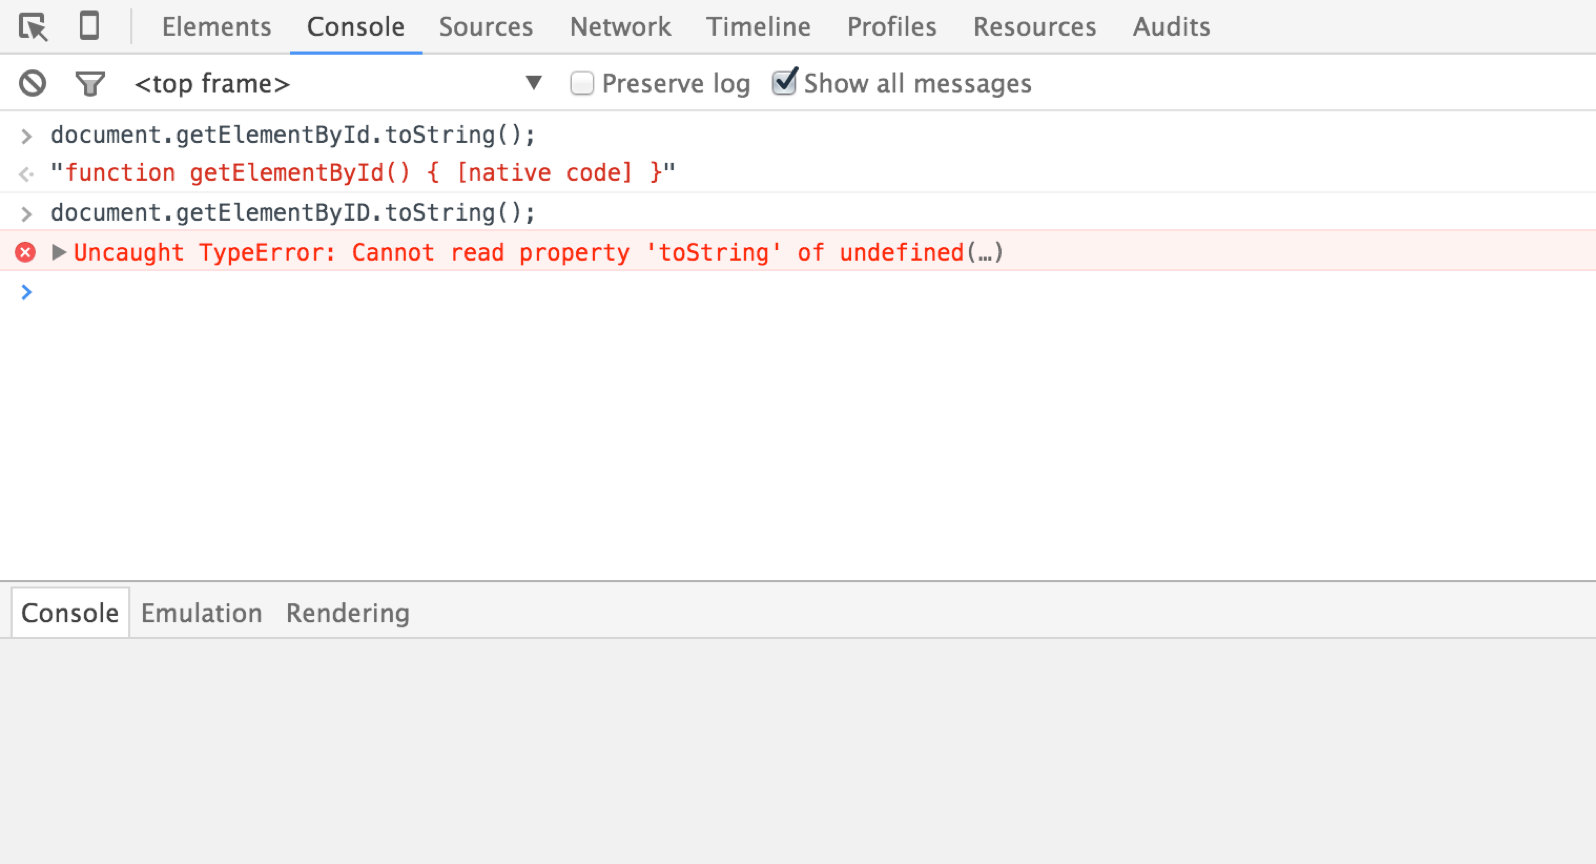 Screenshot of JavaScript console showing how not using the accepted case for defined functions (like getElementByID instead of getElementById) will return an error.